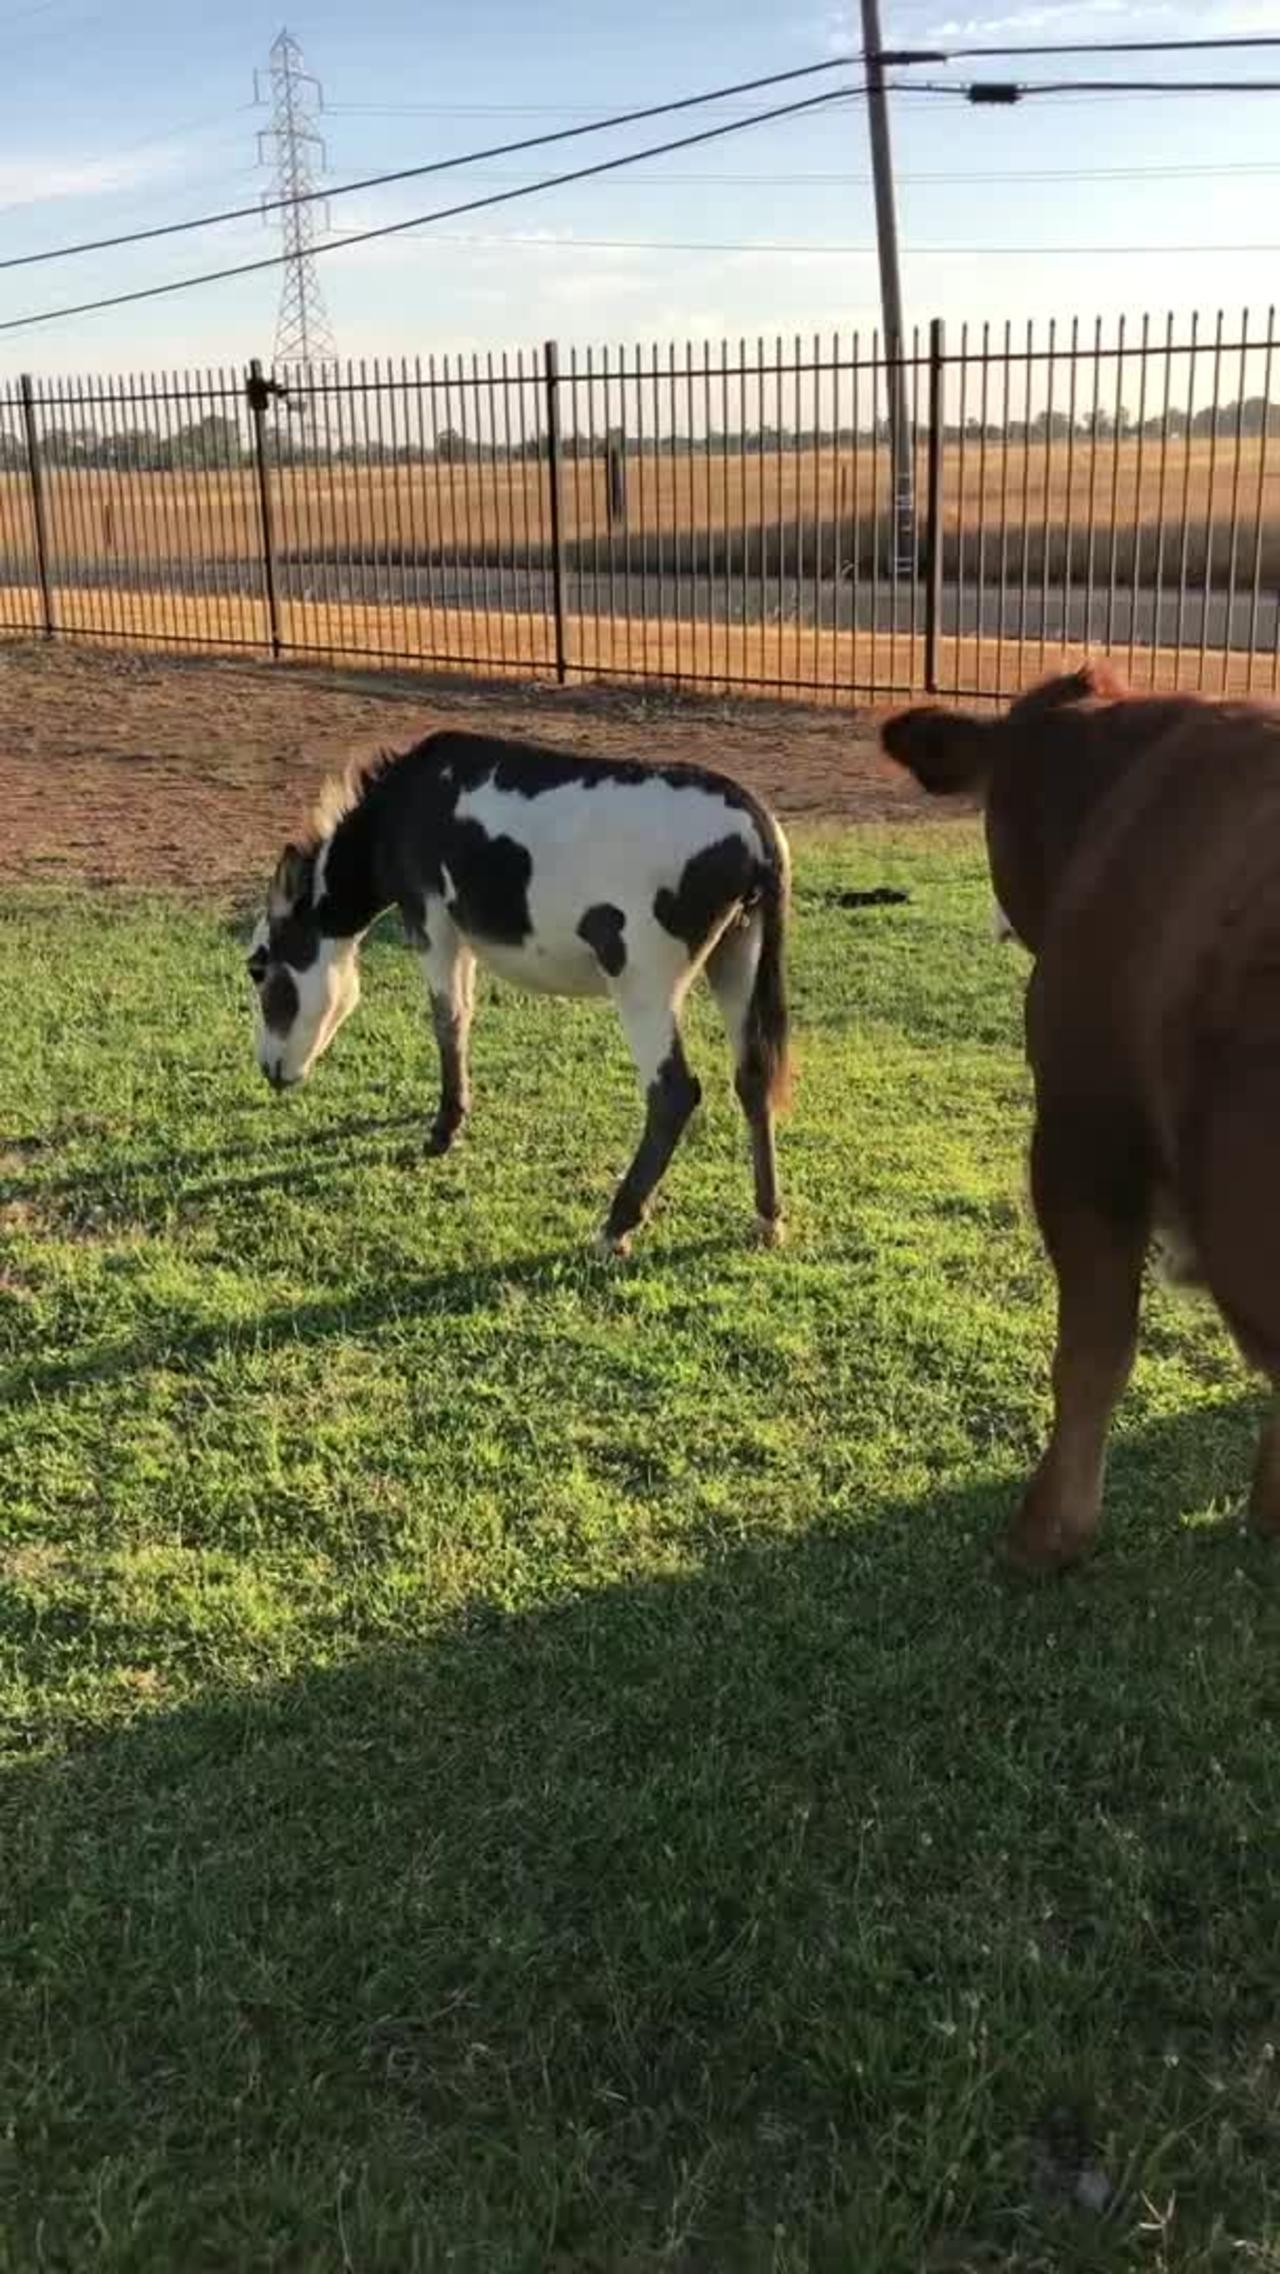 Mini Donkey Defends Cat by Kicking Cow Away When It Made Her Uncomfortable